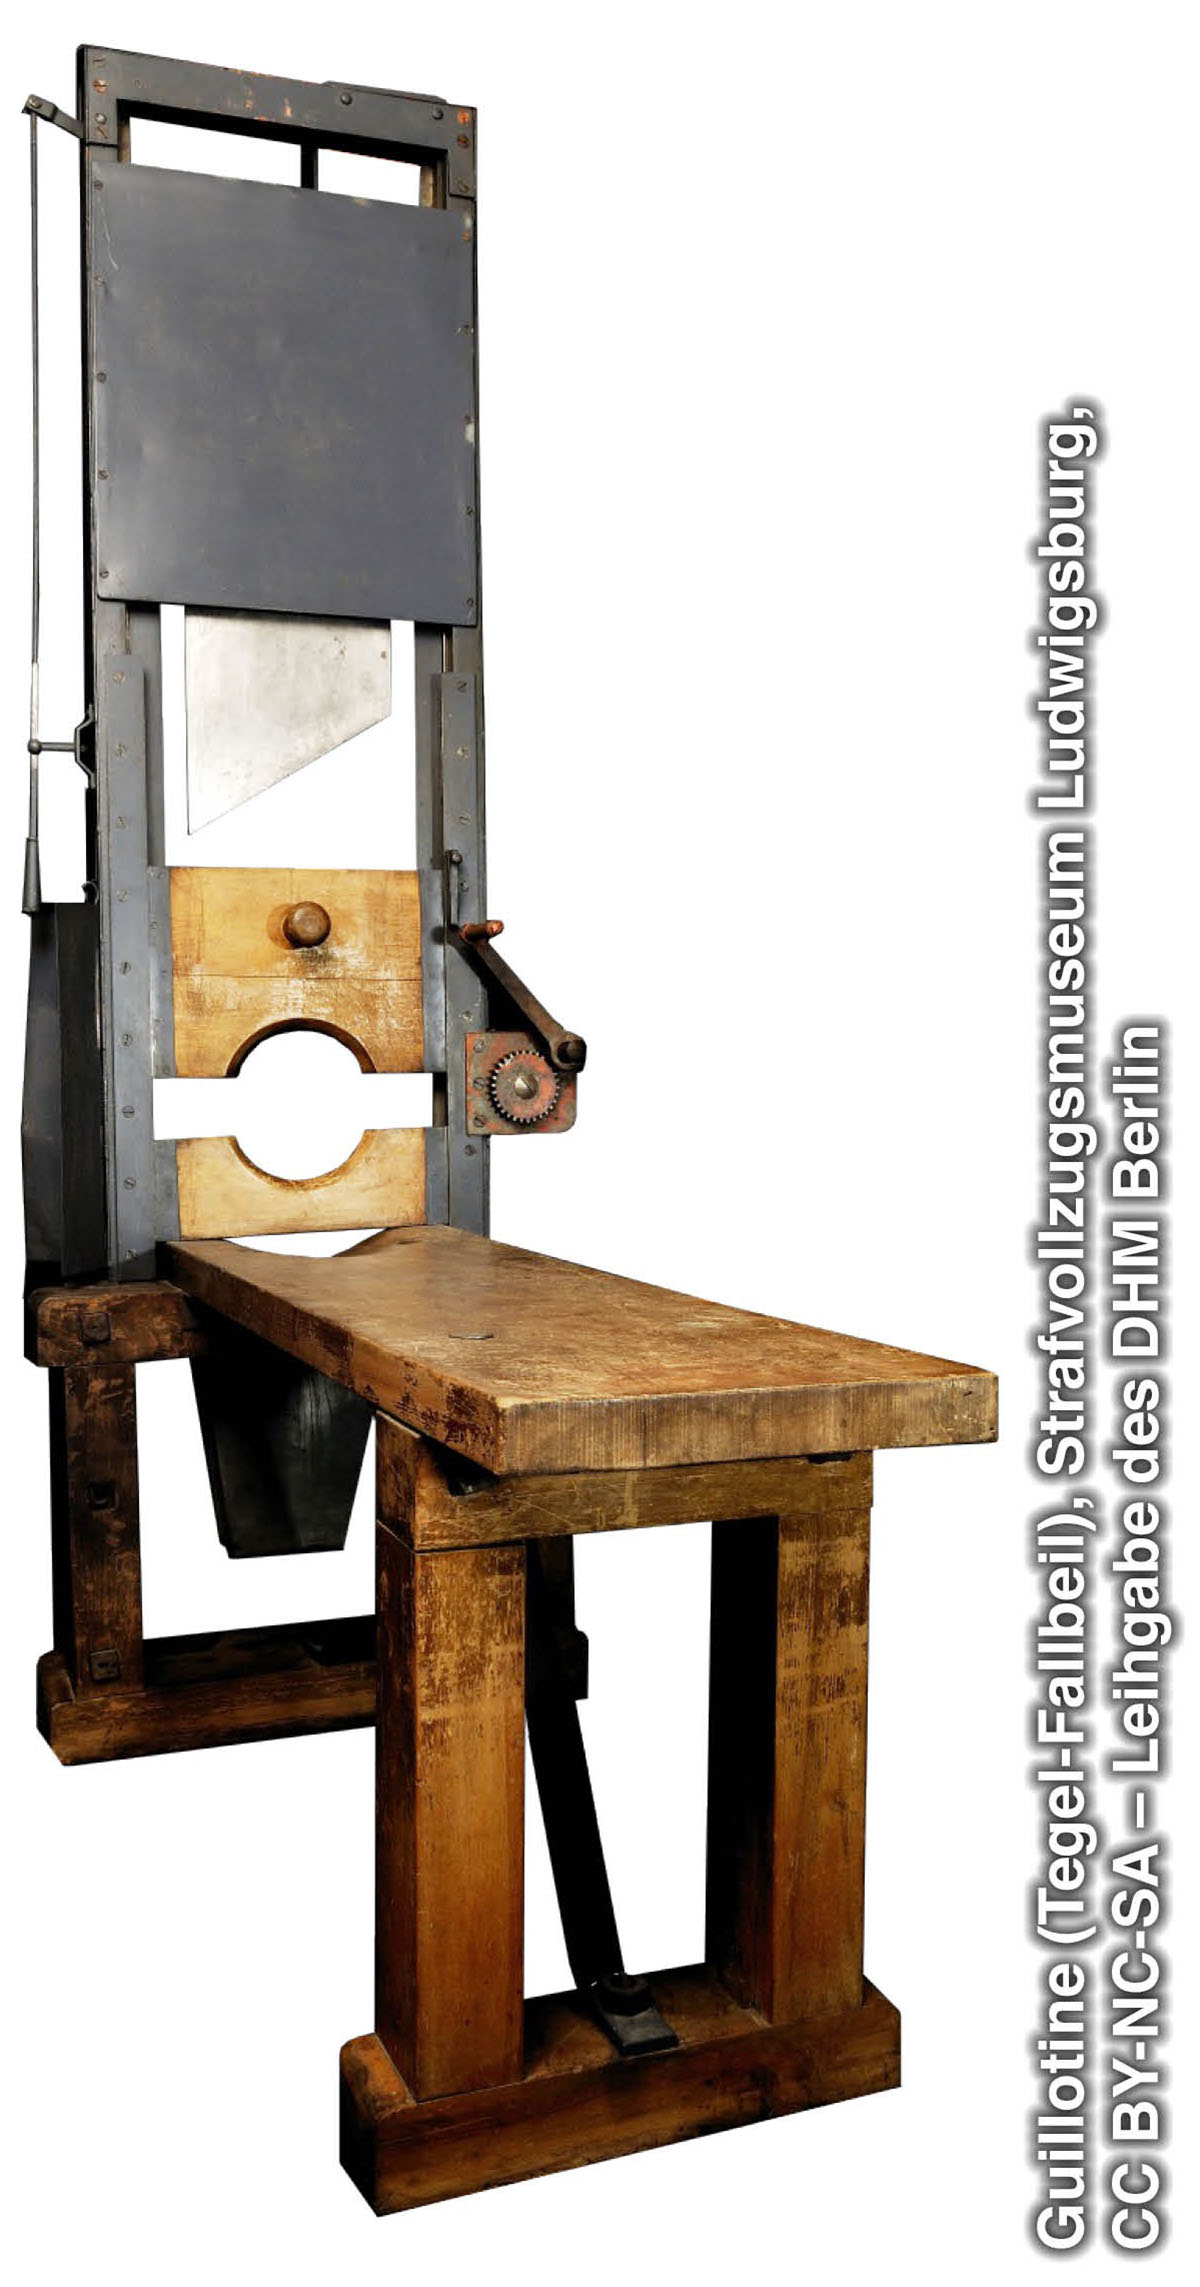 Guillotine used by the Nazis